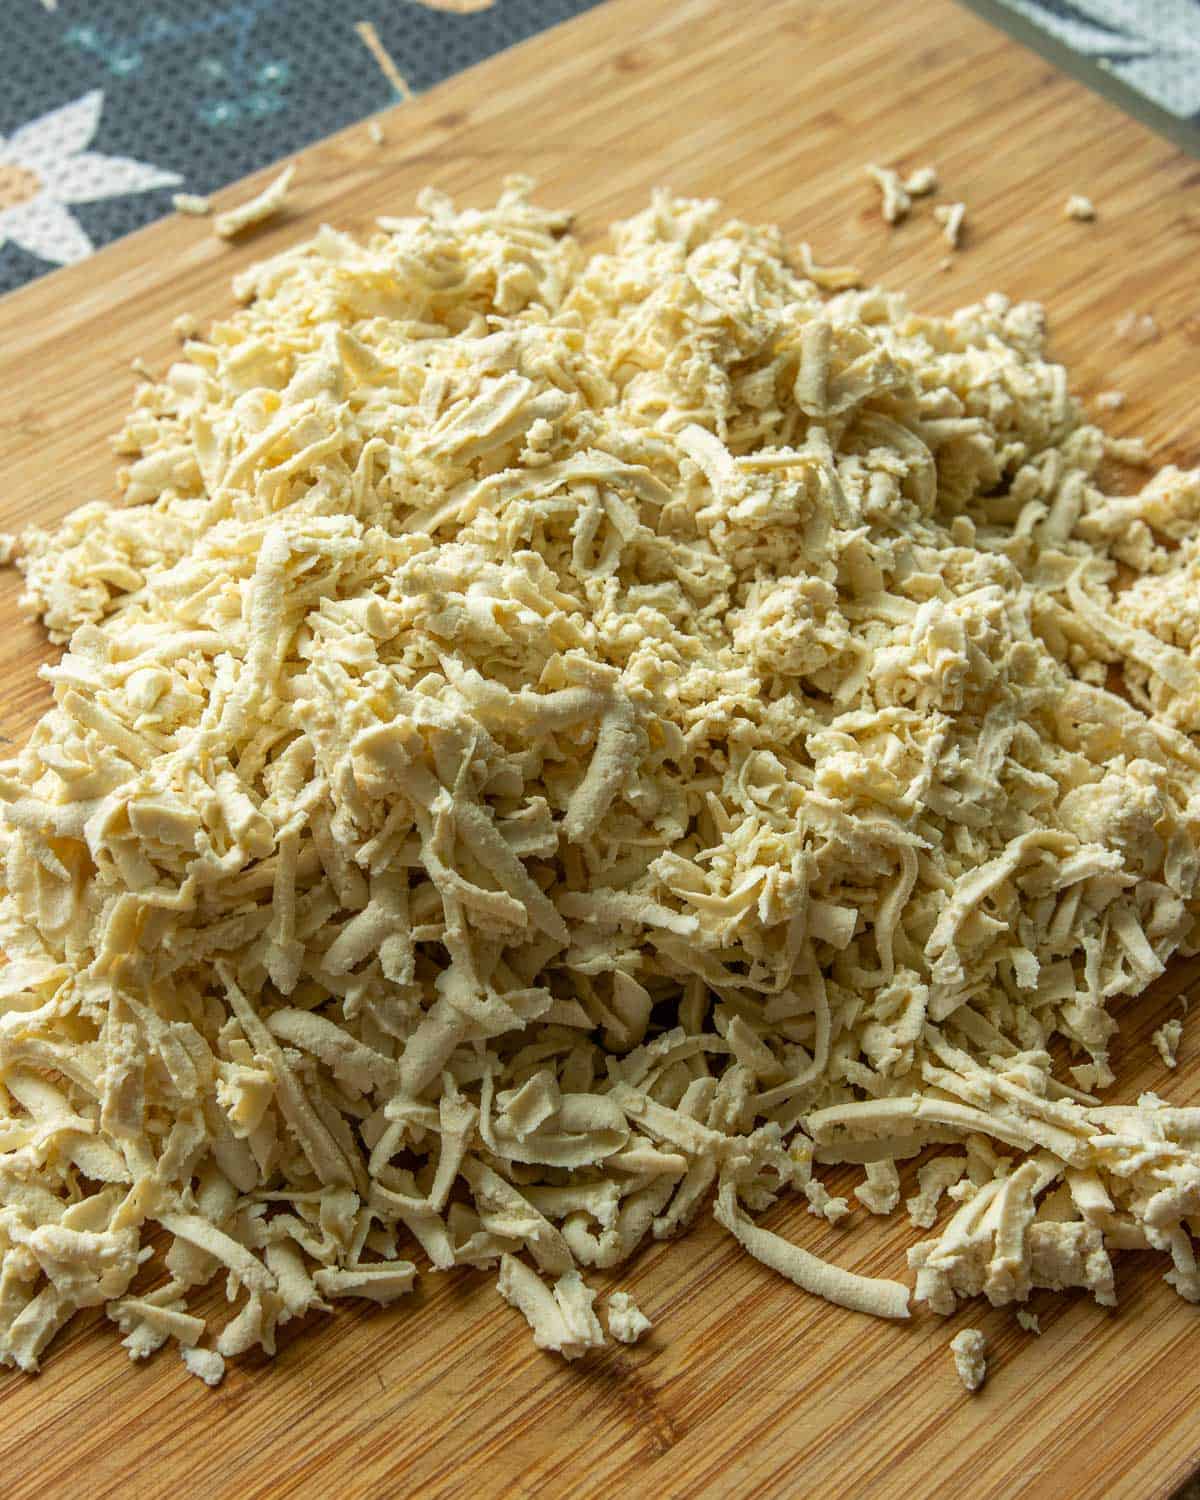 A pile of tofu shredded using a cheese grater.